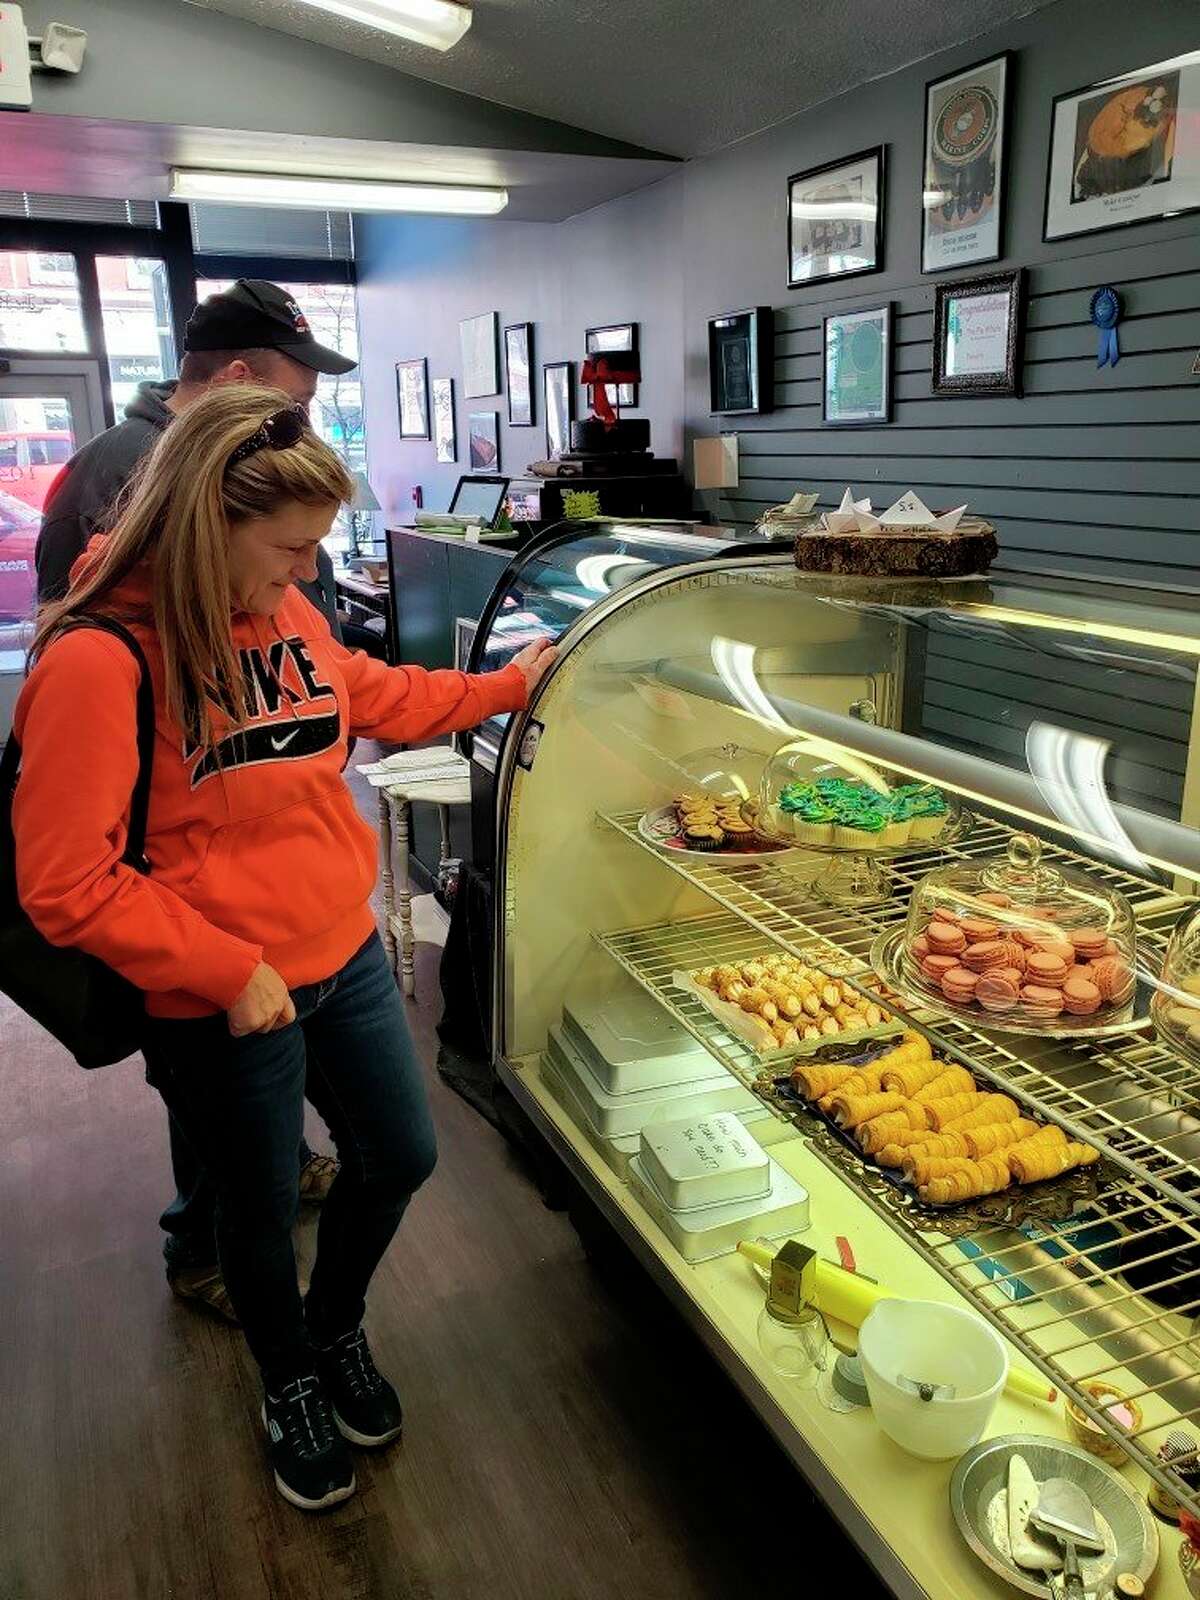 Customers Theresa Mercer and Thomas Hahn shop for goodies at the Pie wHole bakery in Big Rapids. (Pioneer photo/Nicole Chipman)